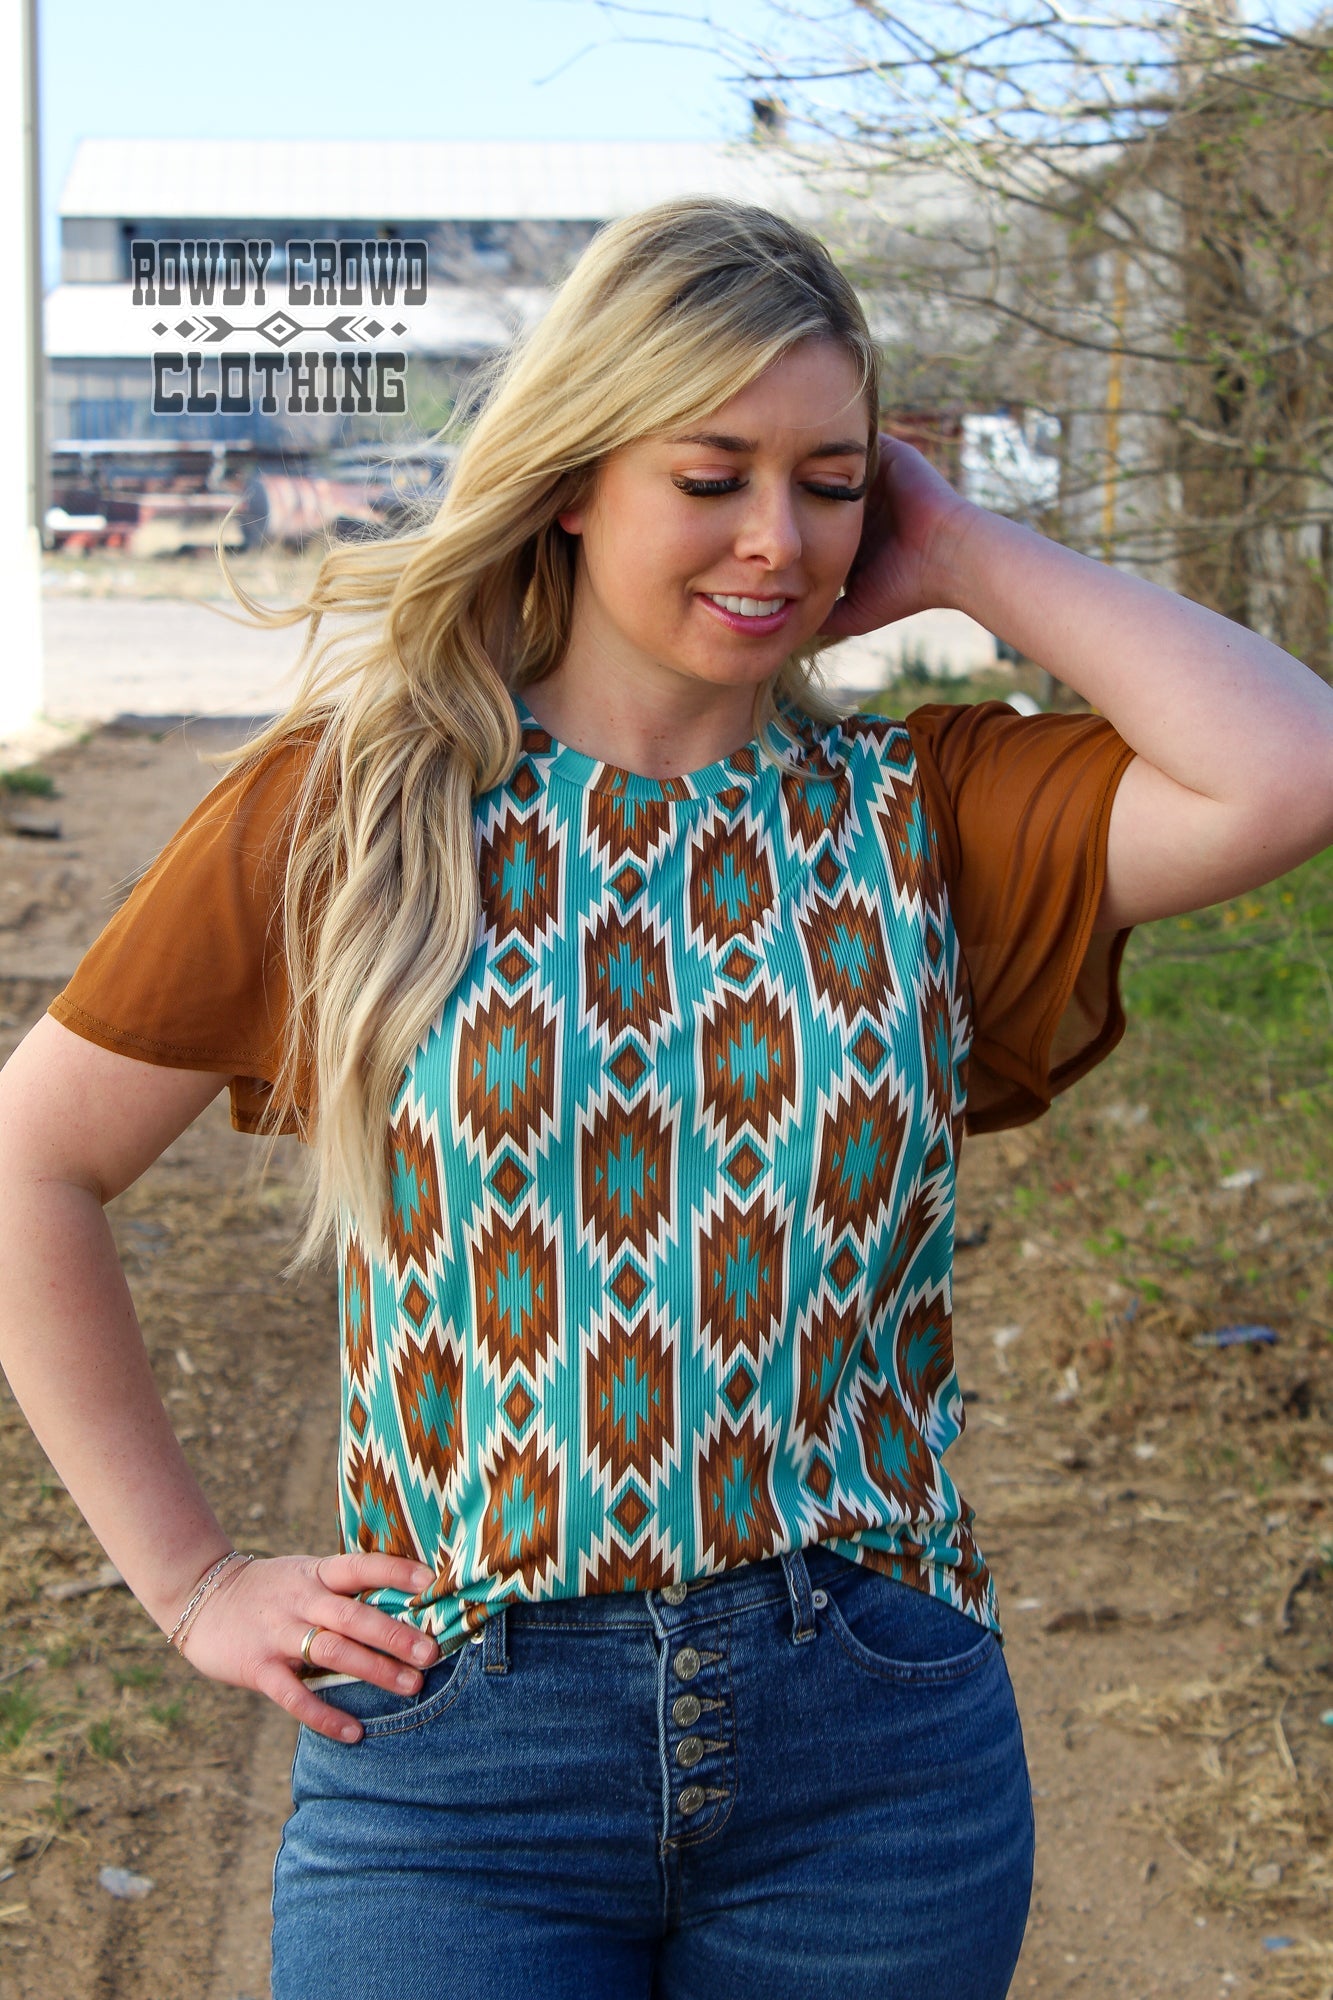 Western Fashion, Western Apparel, Western Tops, Women's Tops, Women's Western Fashion, Western Wholesale, Wholesale Clothing, Western Boutique, Aztec Print